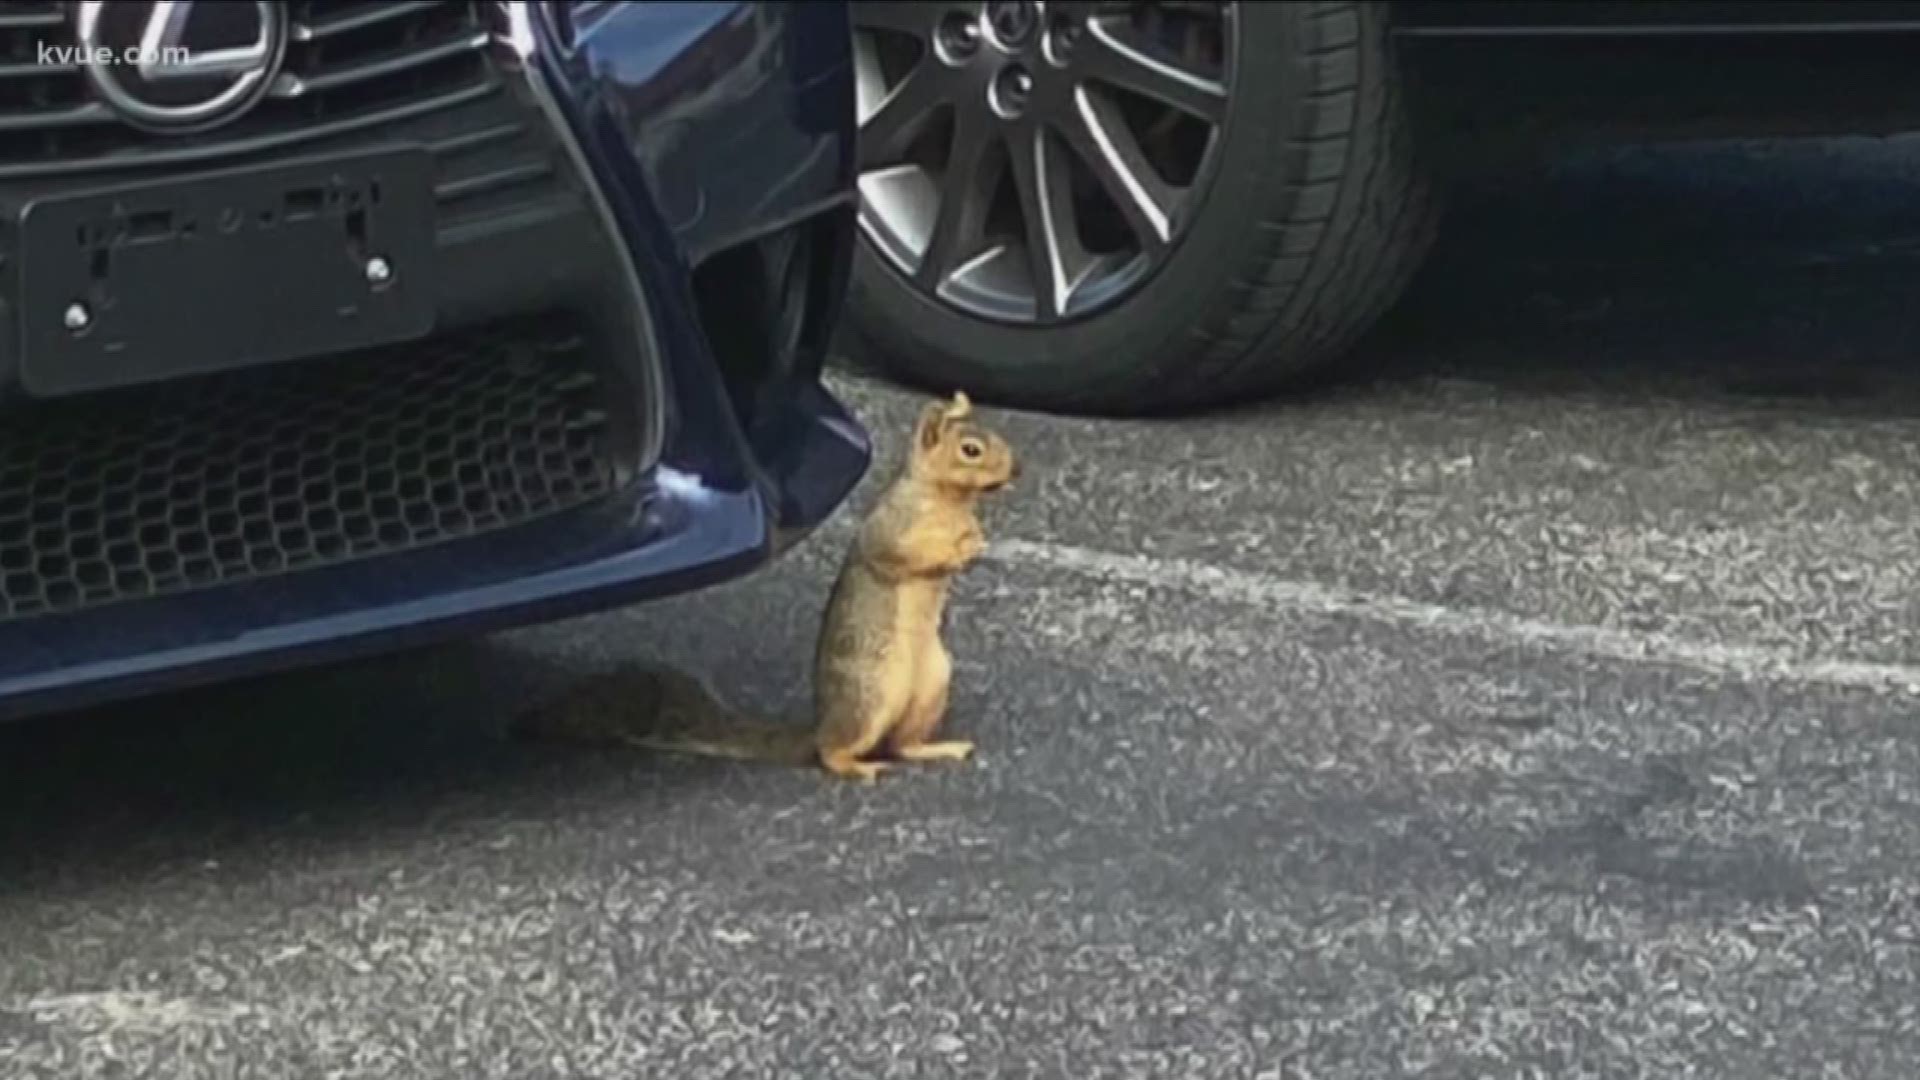 In the past few weeks, squirrels have been causing chaos for KVUE employees.